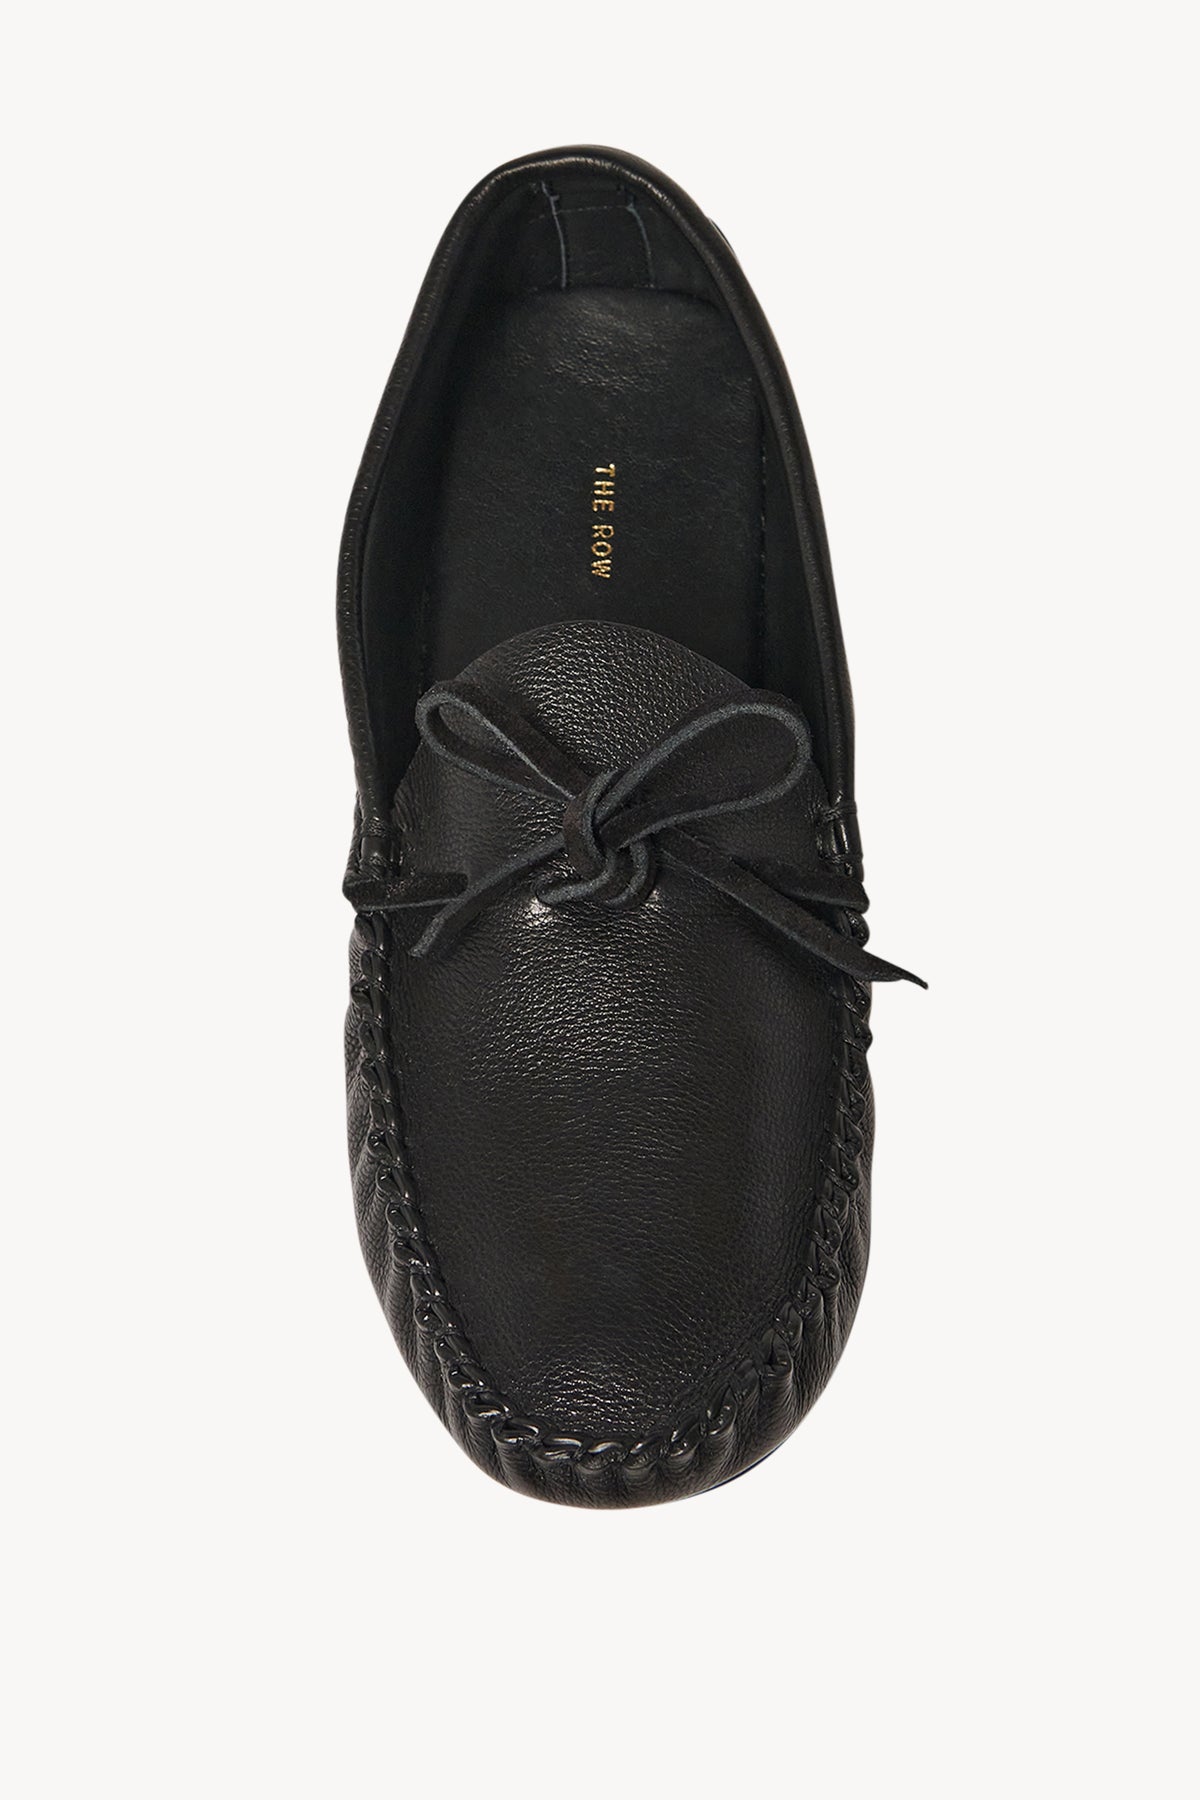 Lucca Moccasin in Leather